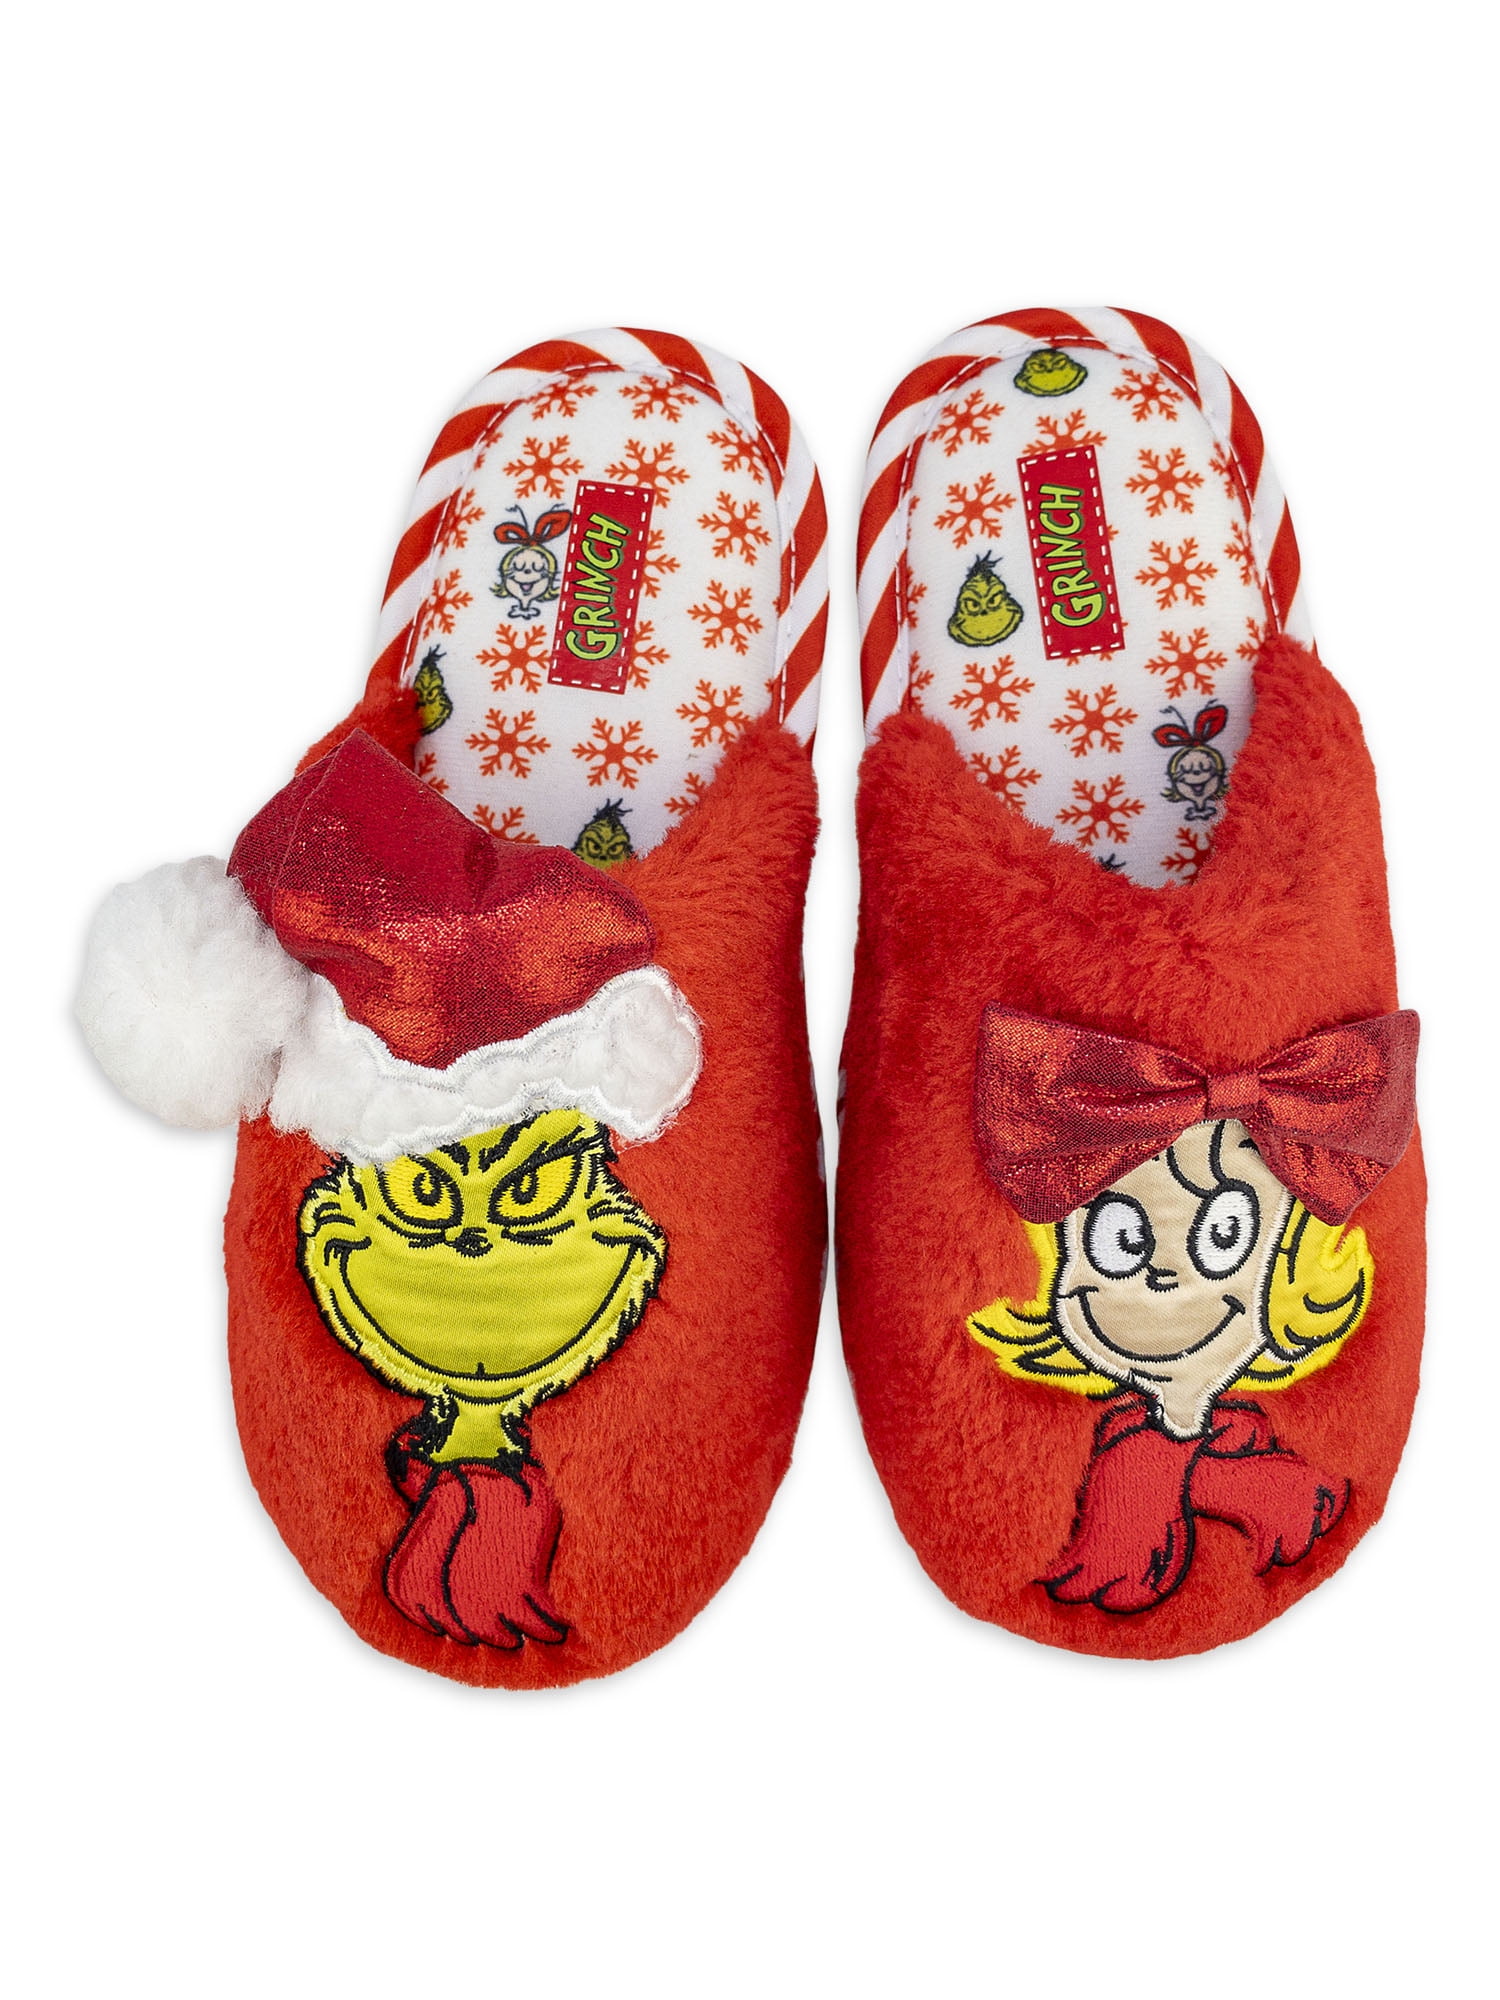 Dr Seuss Grinch Slippers Cindy Lou Who Size 7 8 9 10 11 12 13 1 